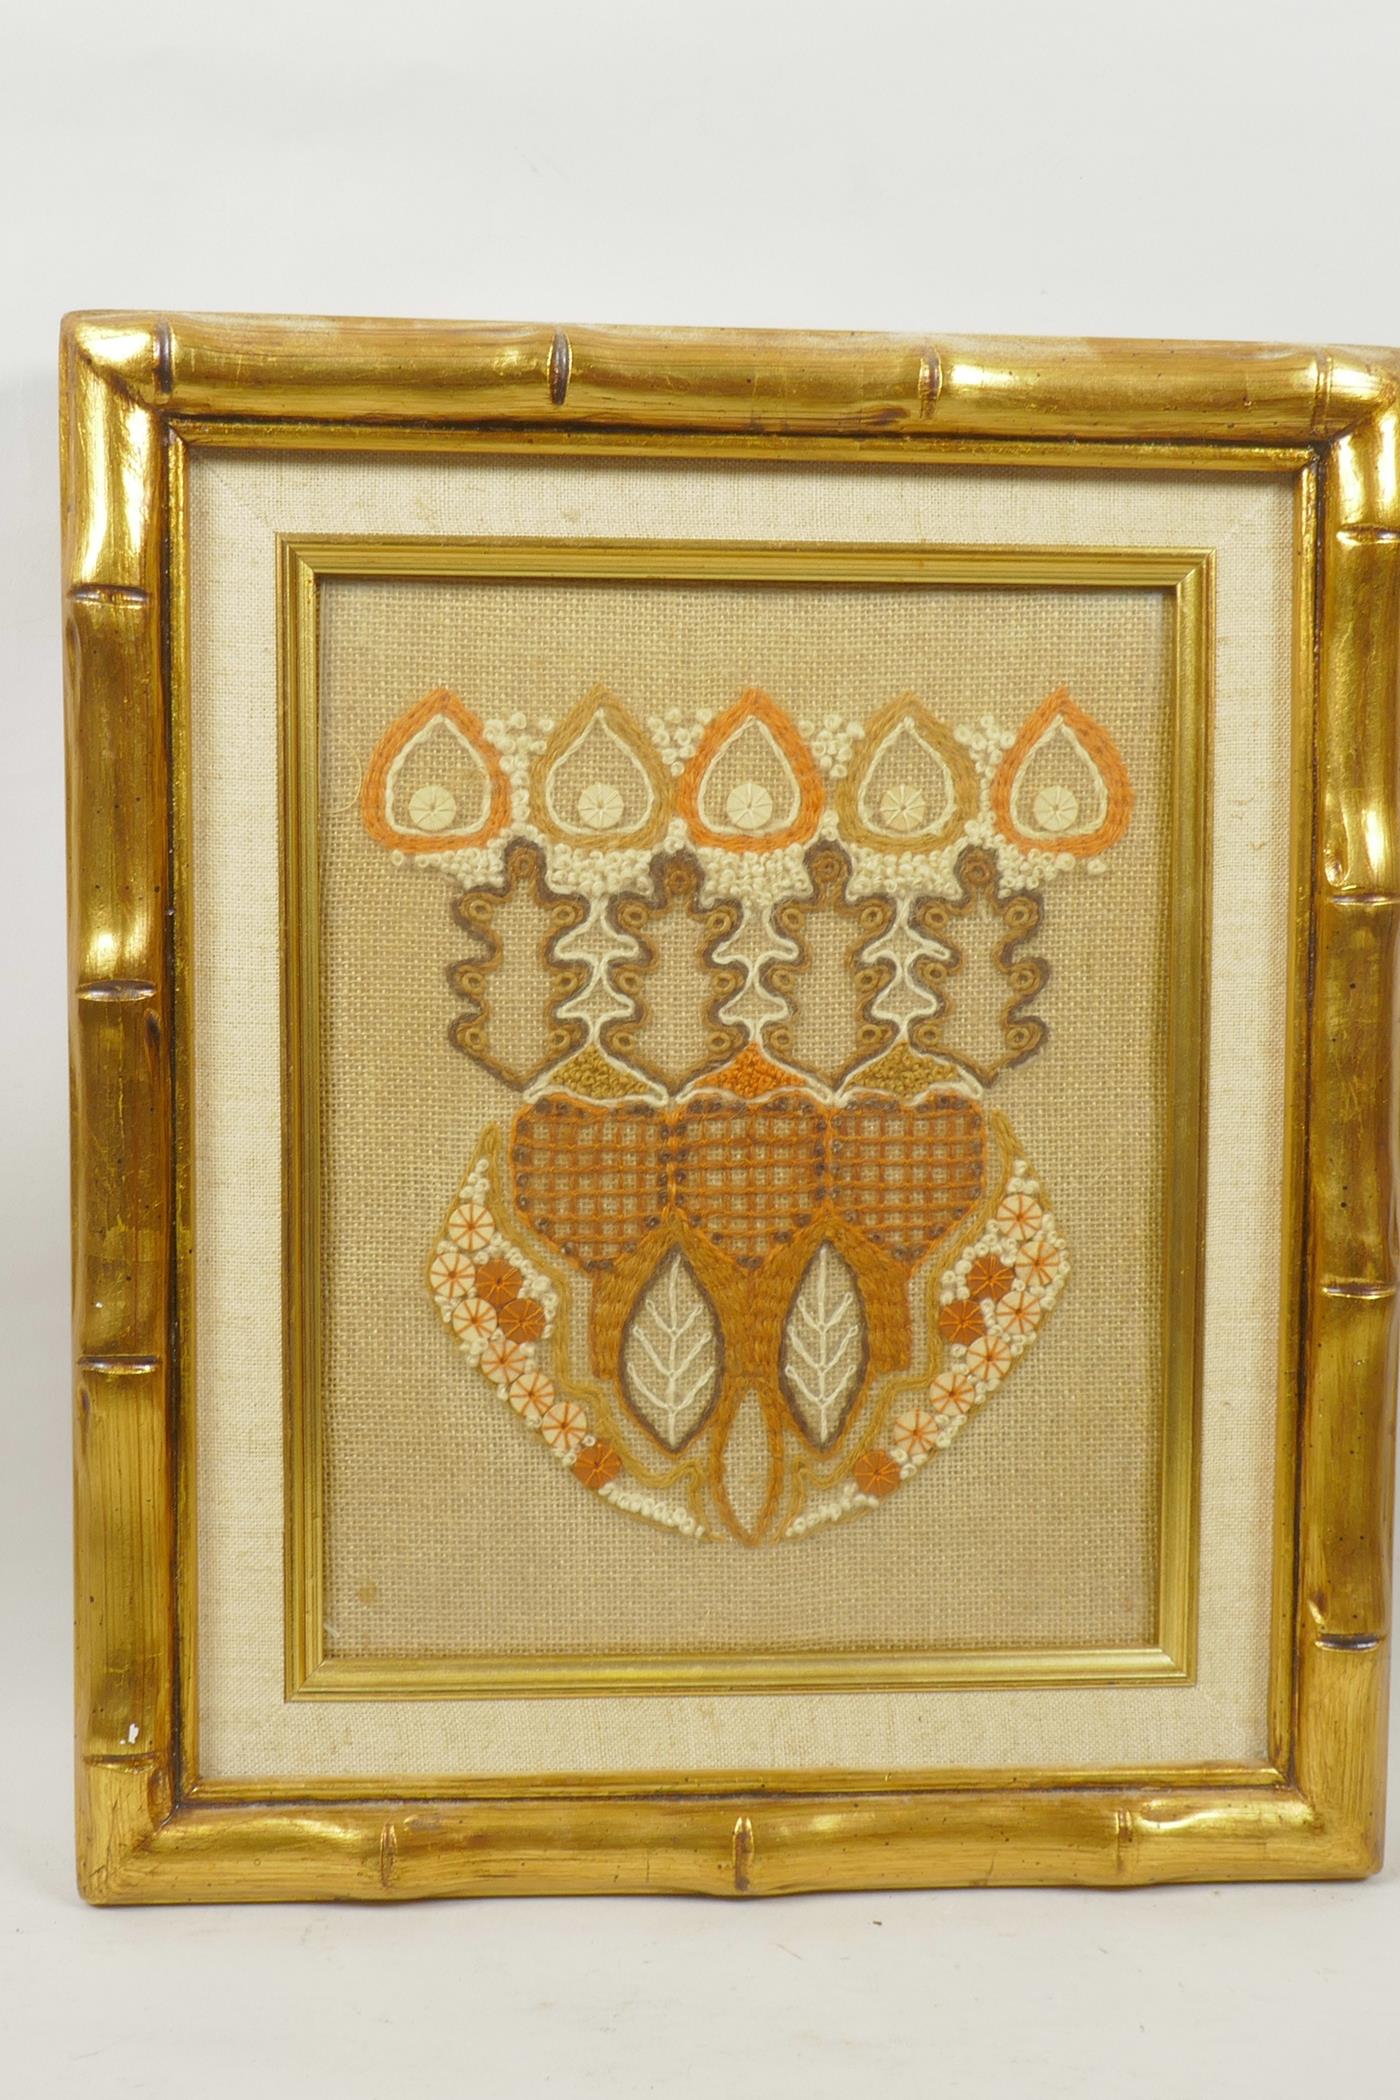 A framed decorative embroidered panel detailed verso: Original embroidered panel made by Jan Messant